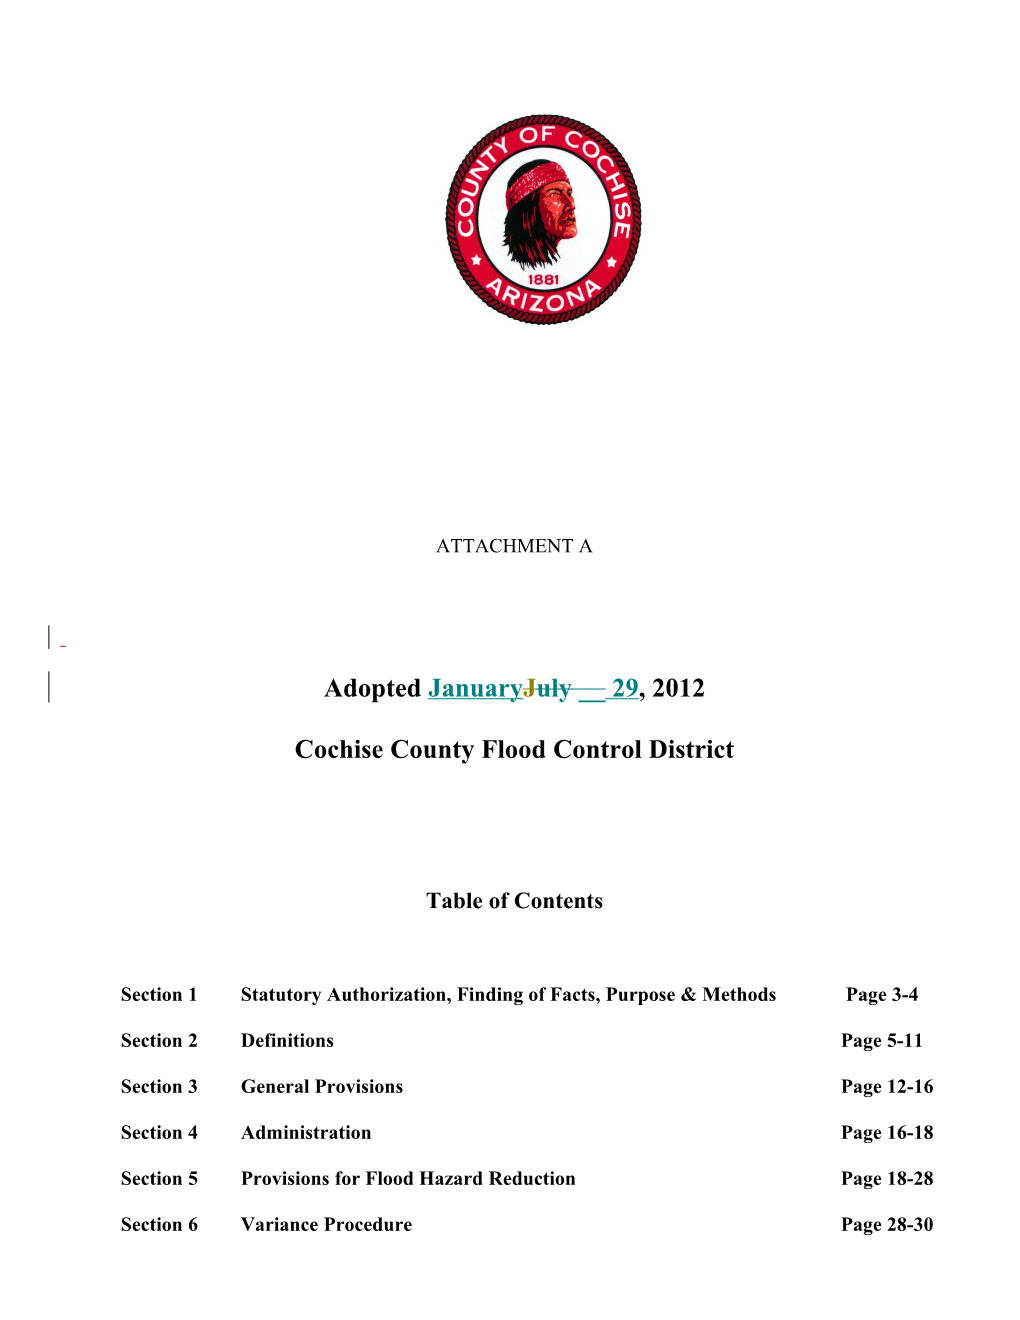 Cochise County Flood Control District